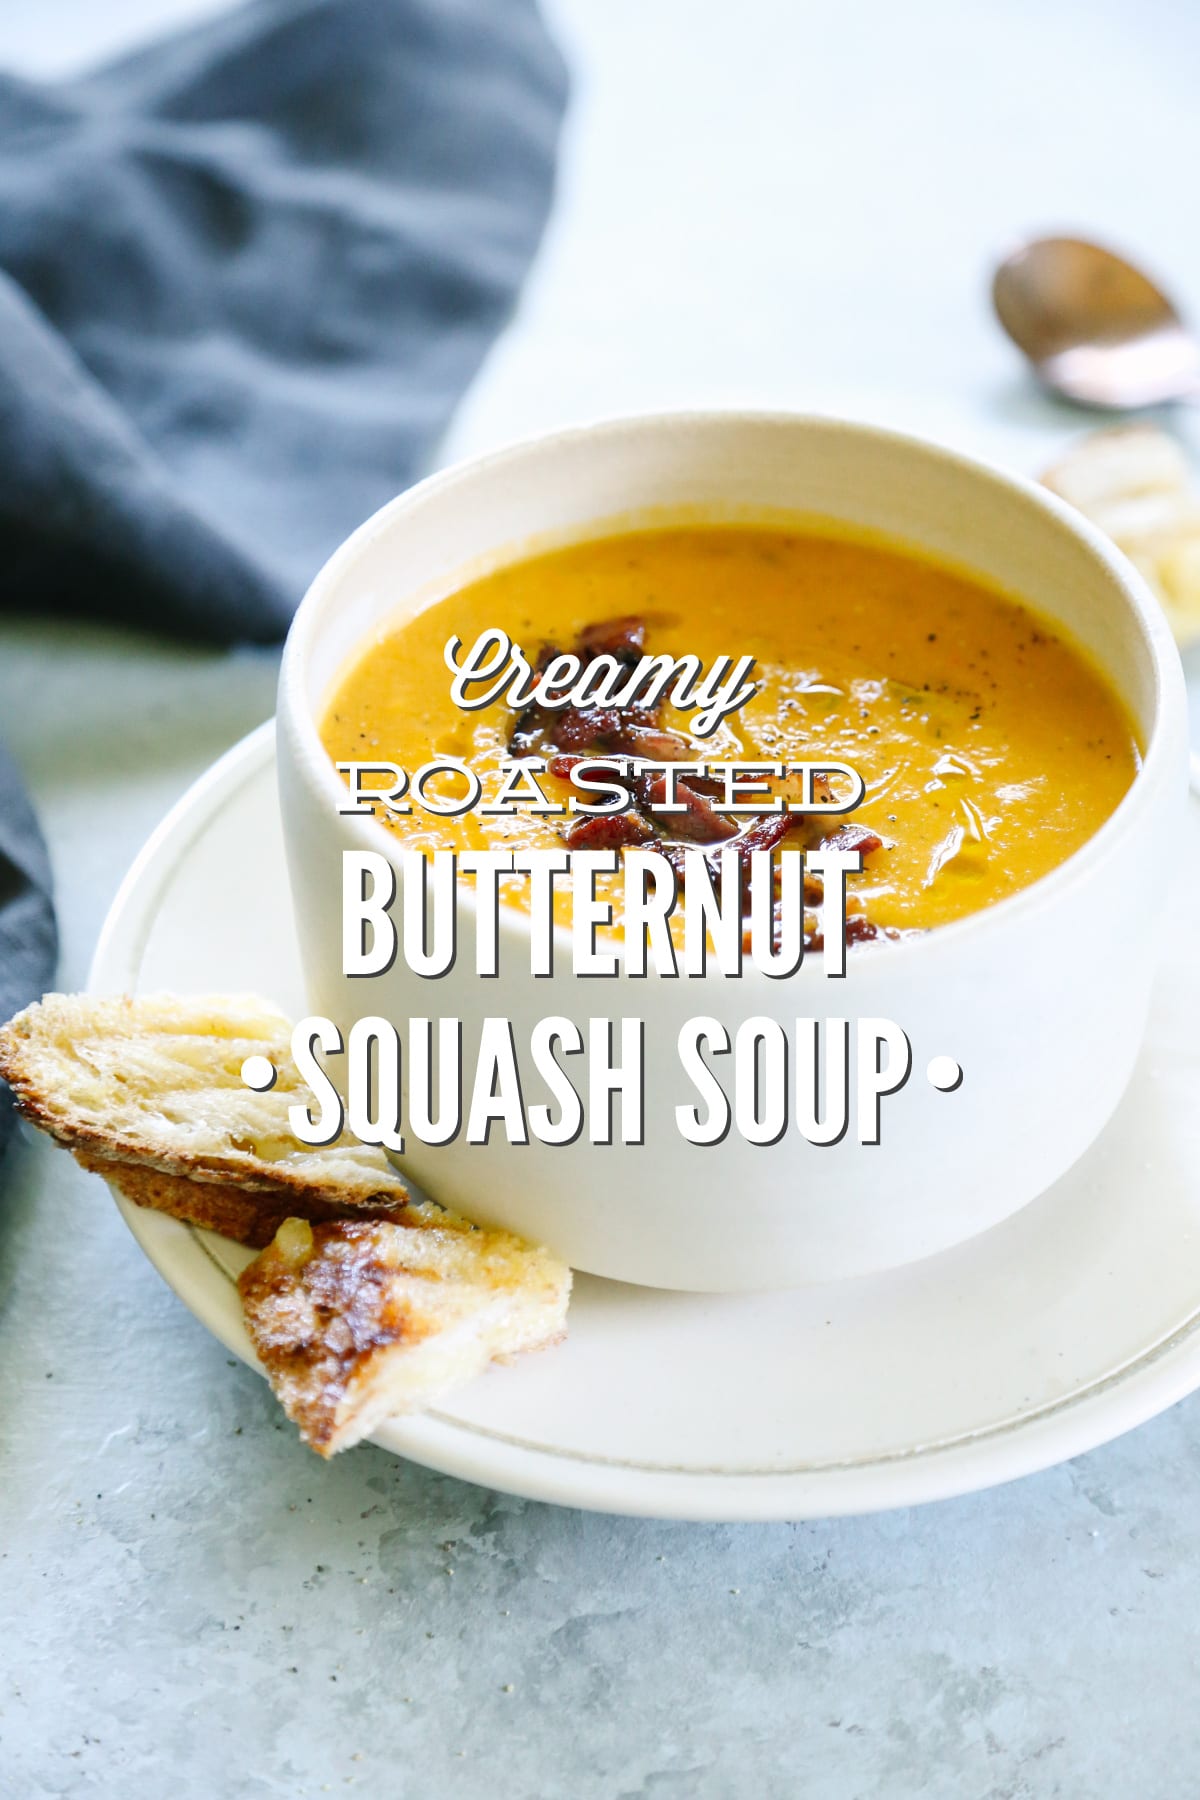 Creamy Roasted Butternut Squash Soup (Dairy-Free)